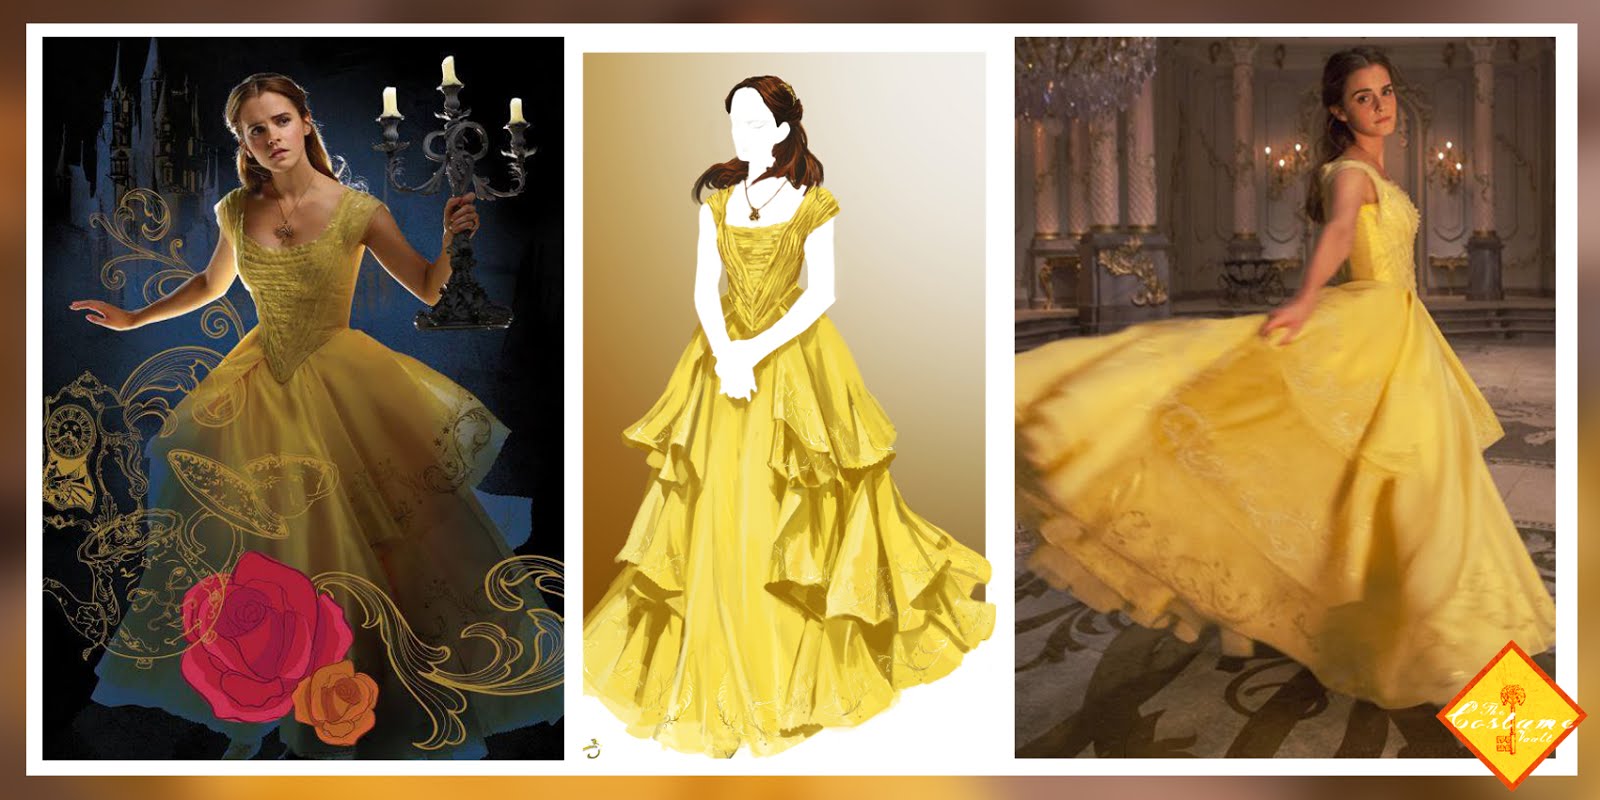 Burning Question What S Wrong With Belle S Gown